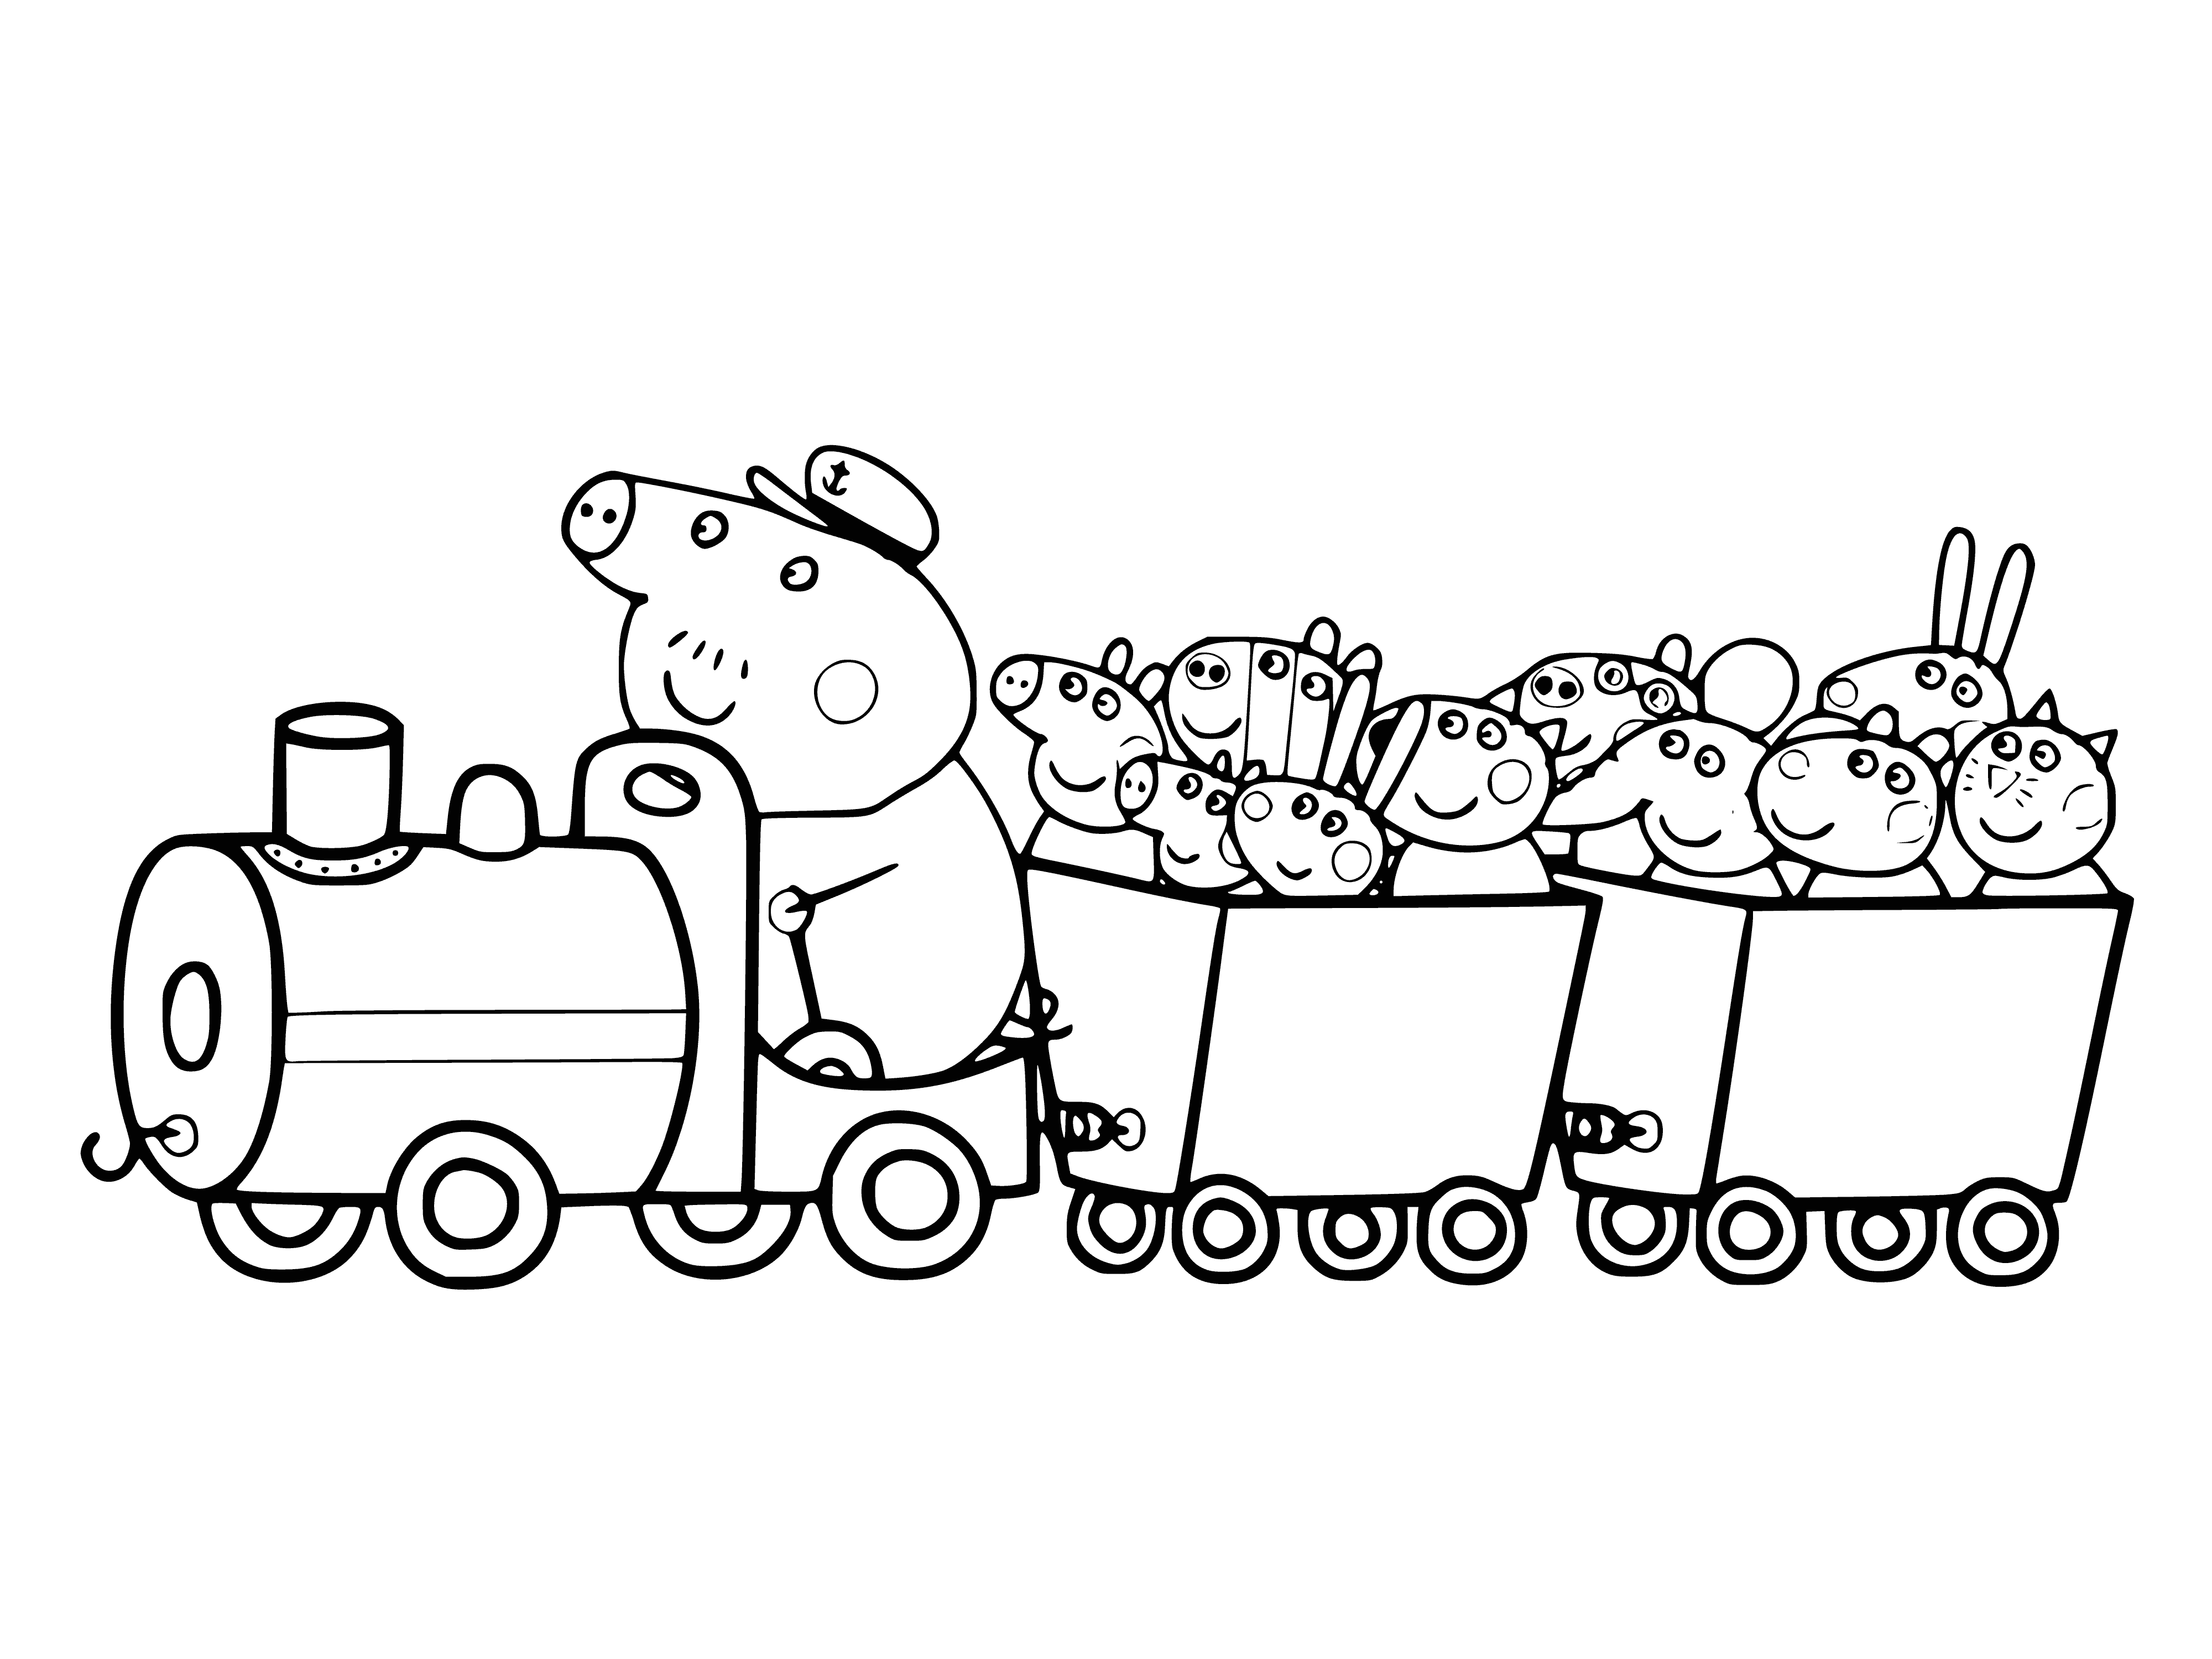 coloring page: Grandpa Pig drives a steam train with Peppa and George on top, holding a flag. #peppapig #trains